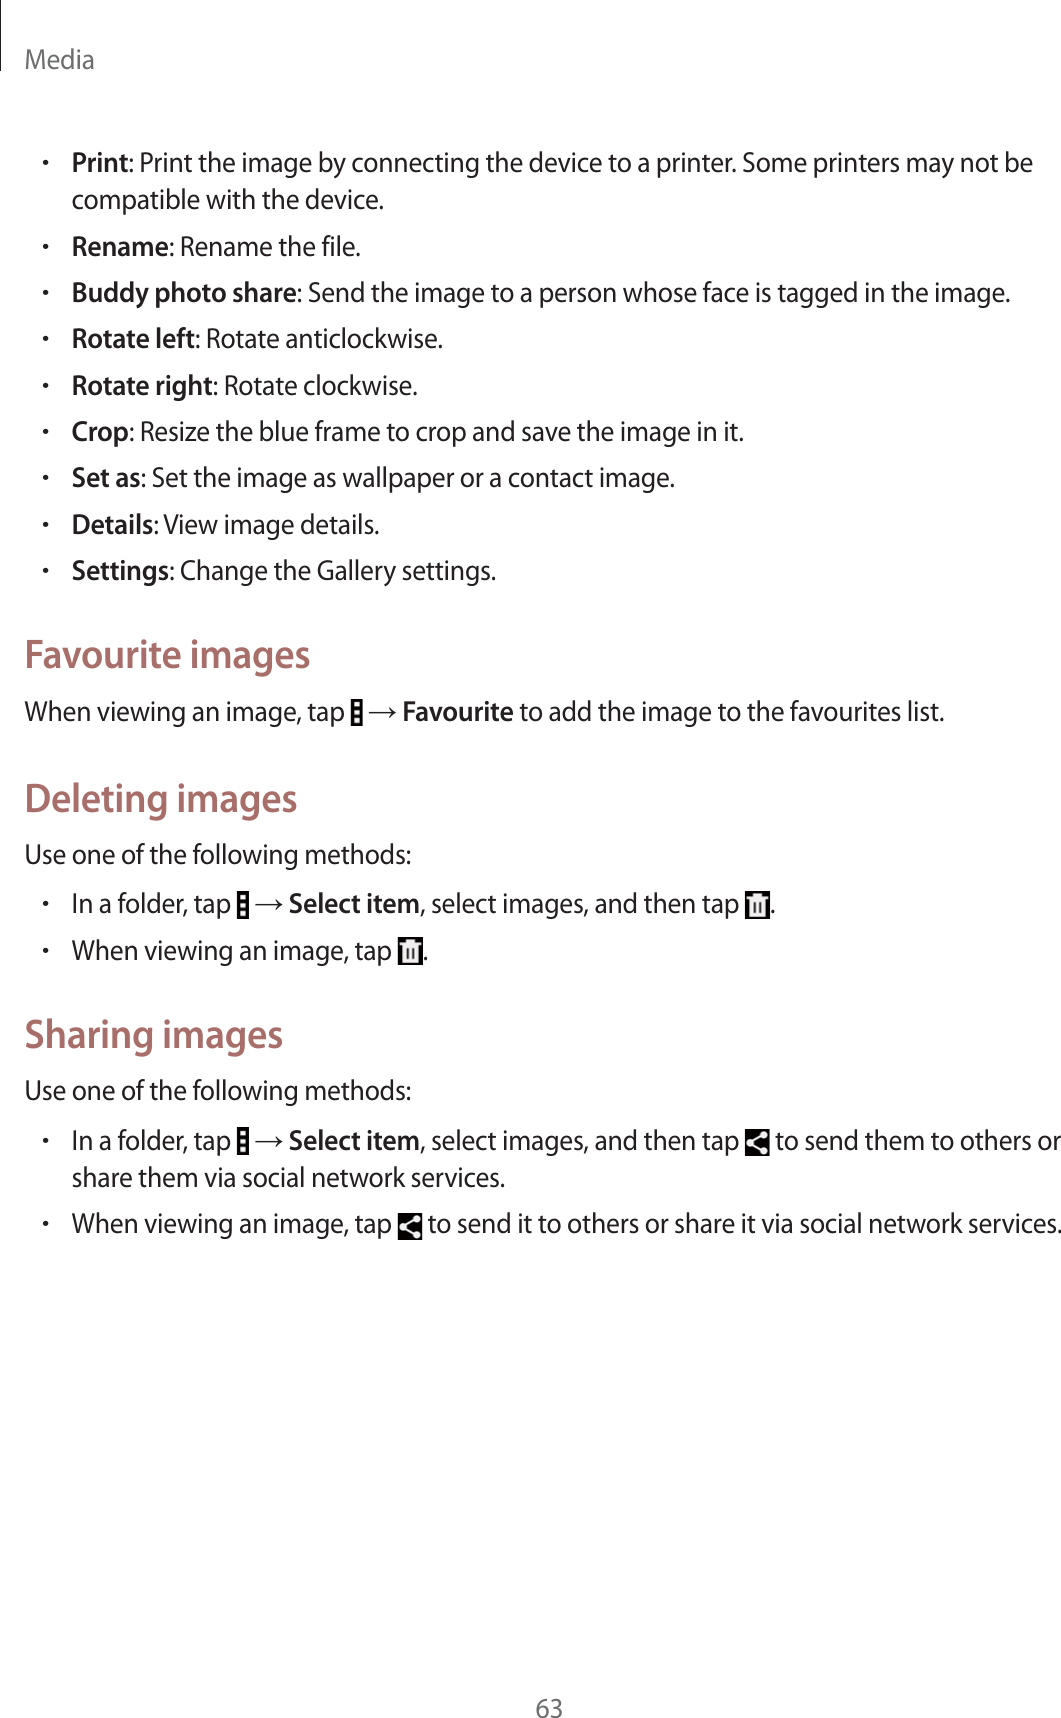 Media63rPrint: Print the image by connecting the device to a printer. Some printers may not be compatible with the device.rRename: Rename the file.rBuddy photo share: Send the image to a person whose face is tagged in the image.rRotate left: Rotate anticlockwise.rRotate right: Rotate clockwise.rCrop: Resize the blue frame to crop and save the image in it.rSet as: Set the image as wallpaper or a contact image.rDetails: View image details.rSettings: Change the Gallery settings.Favourite imagesWhen viewing an image, tap   ĺ Favourite to add the image to the favourites list.Deleting imagesUse one of the following methods:rIn a folder, tap   ĺ Select item, select images, and then tap  .rWhen viewing an image, tap  .Sharing imagesUse one of the following methods:rIn a folder, tap   ĺ Select item, select images, and then tap   to send them to others or share them via social network services.rWhen viewing an image, tap   to send it to others or share it via social network services.